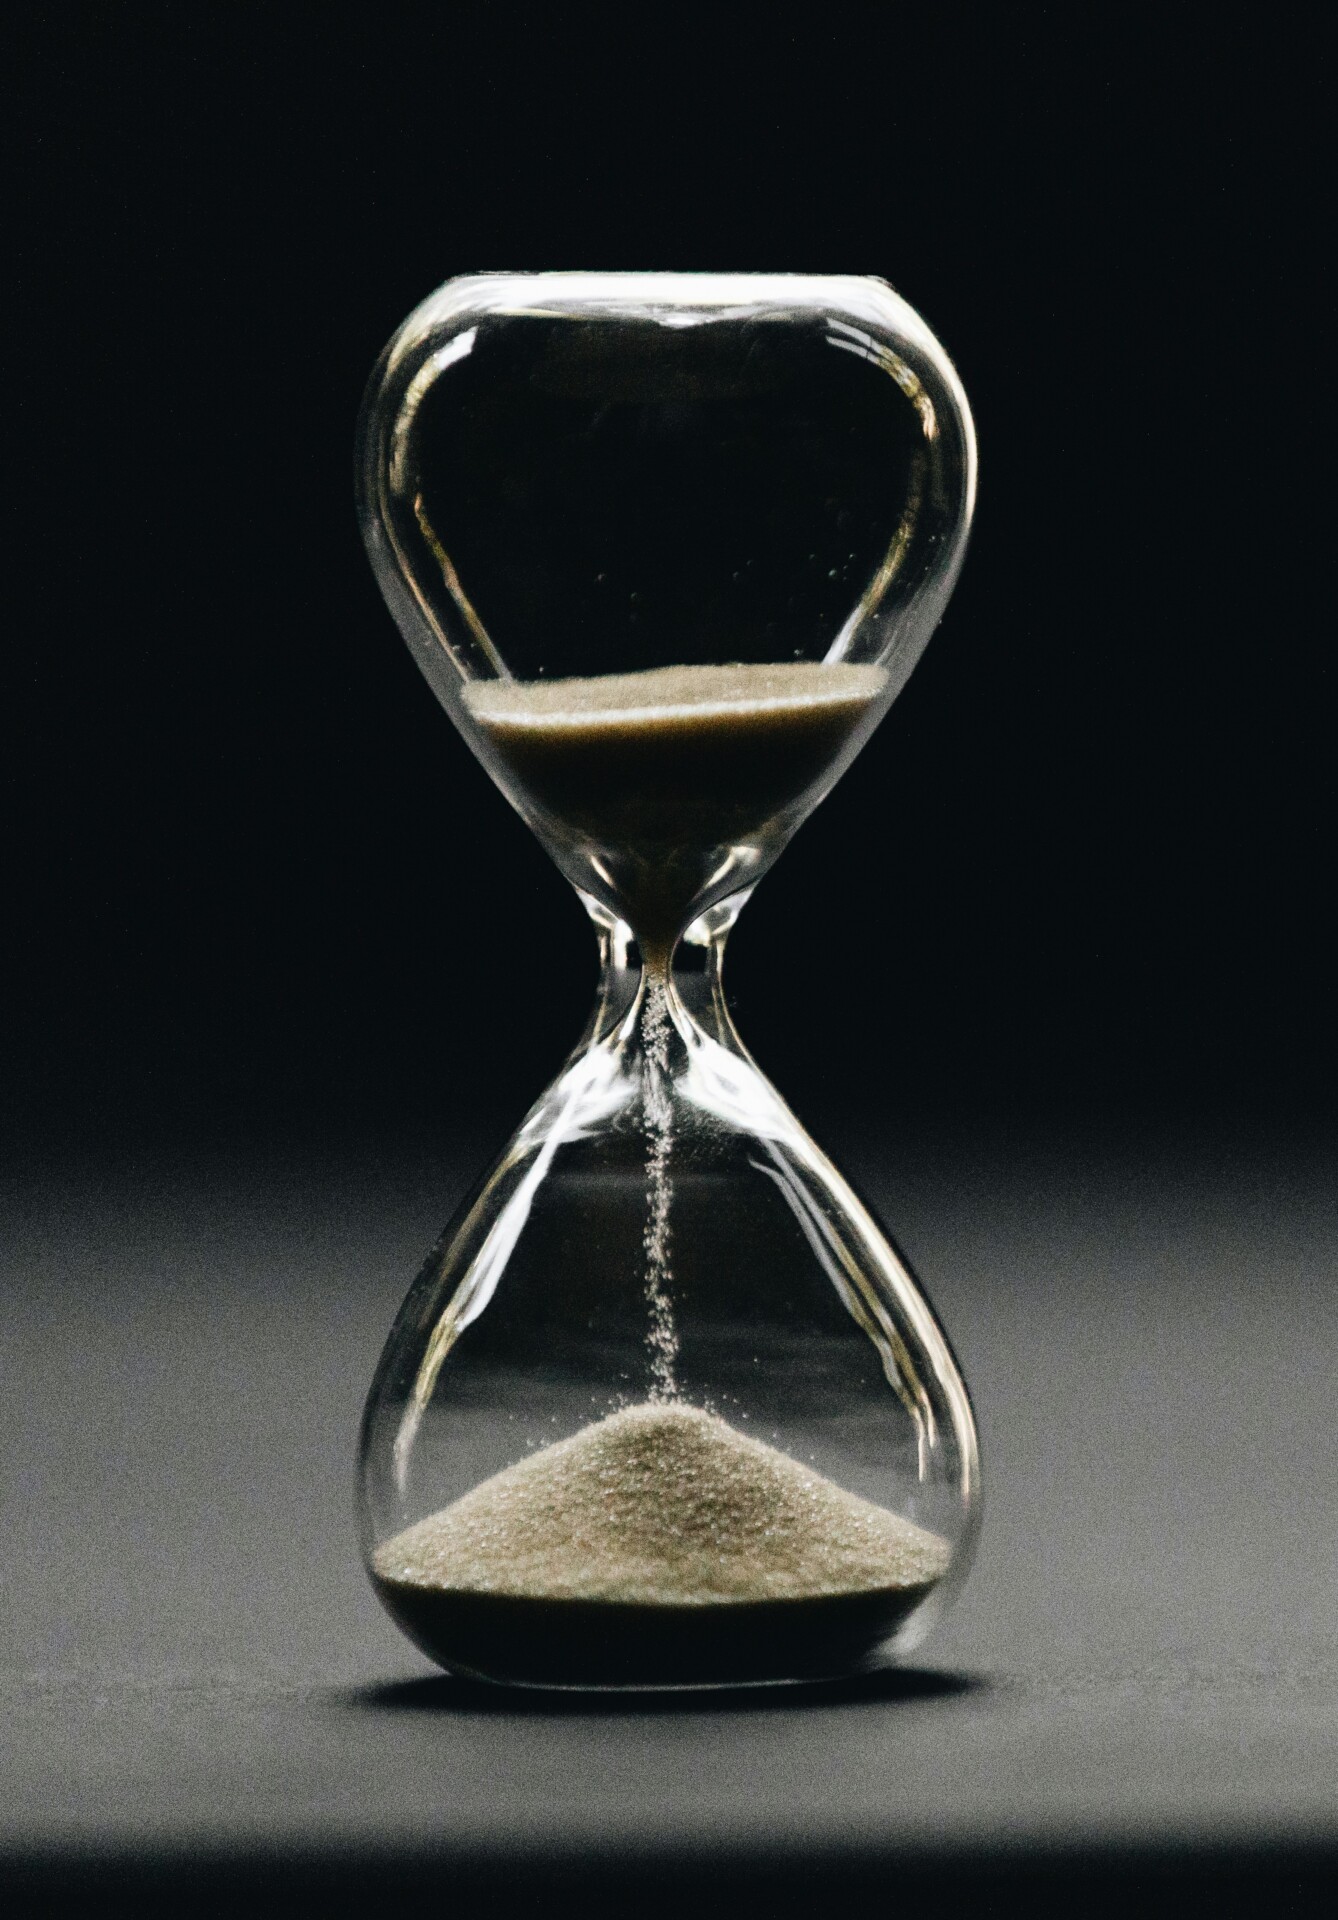 hour glass with falling sand